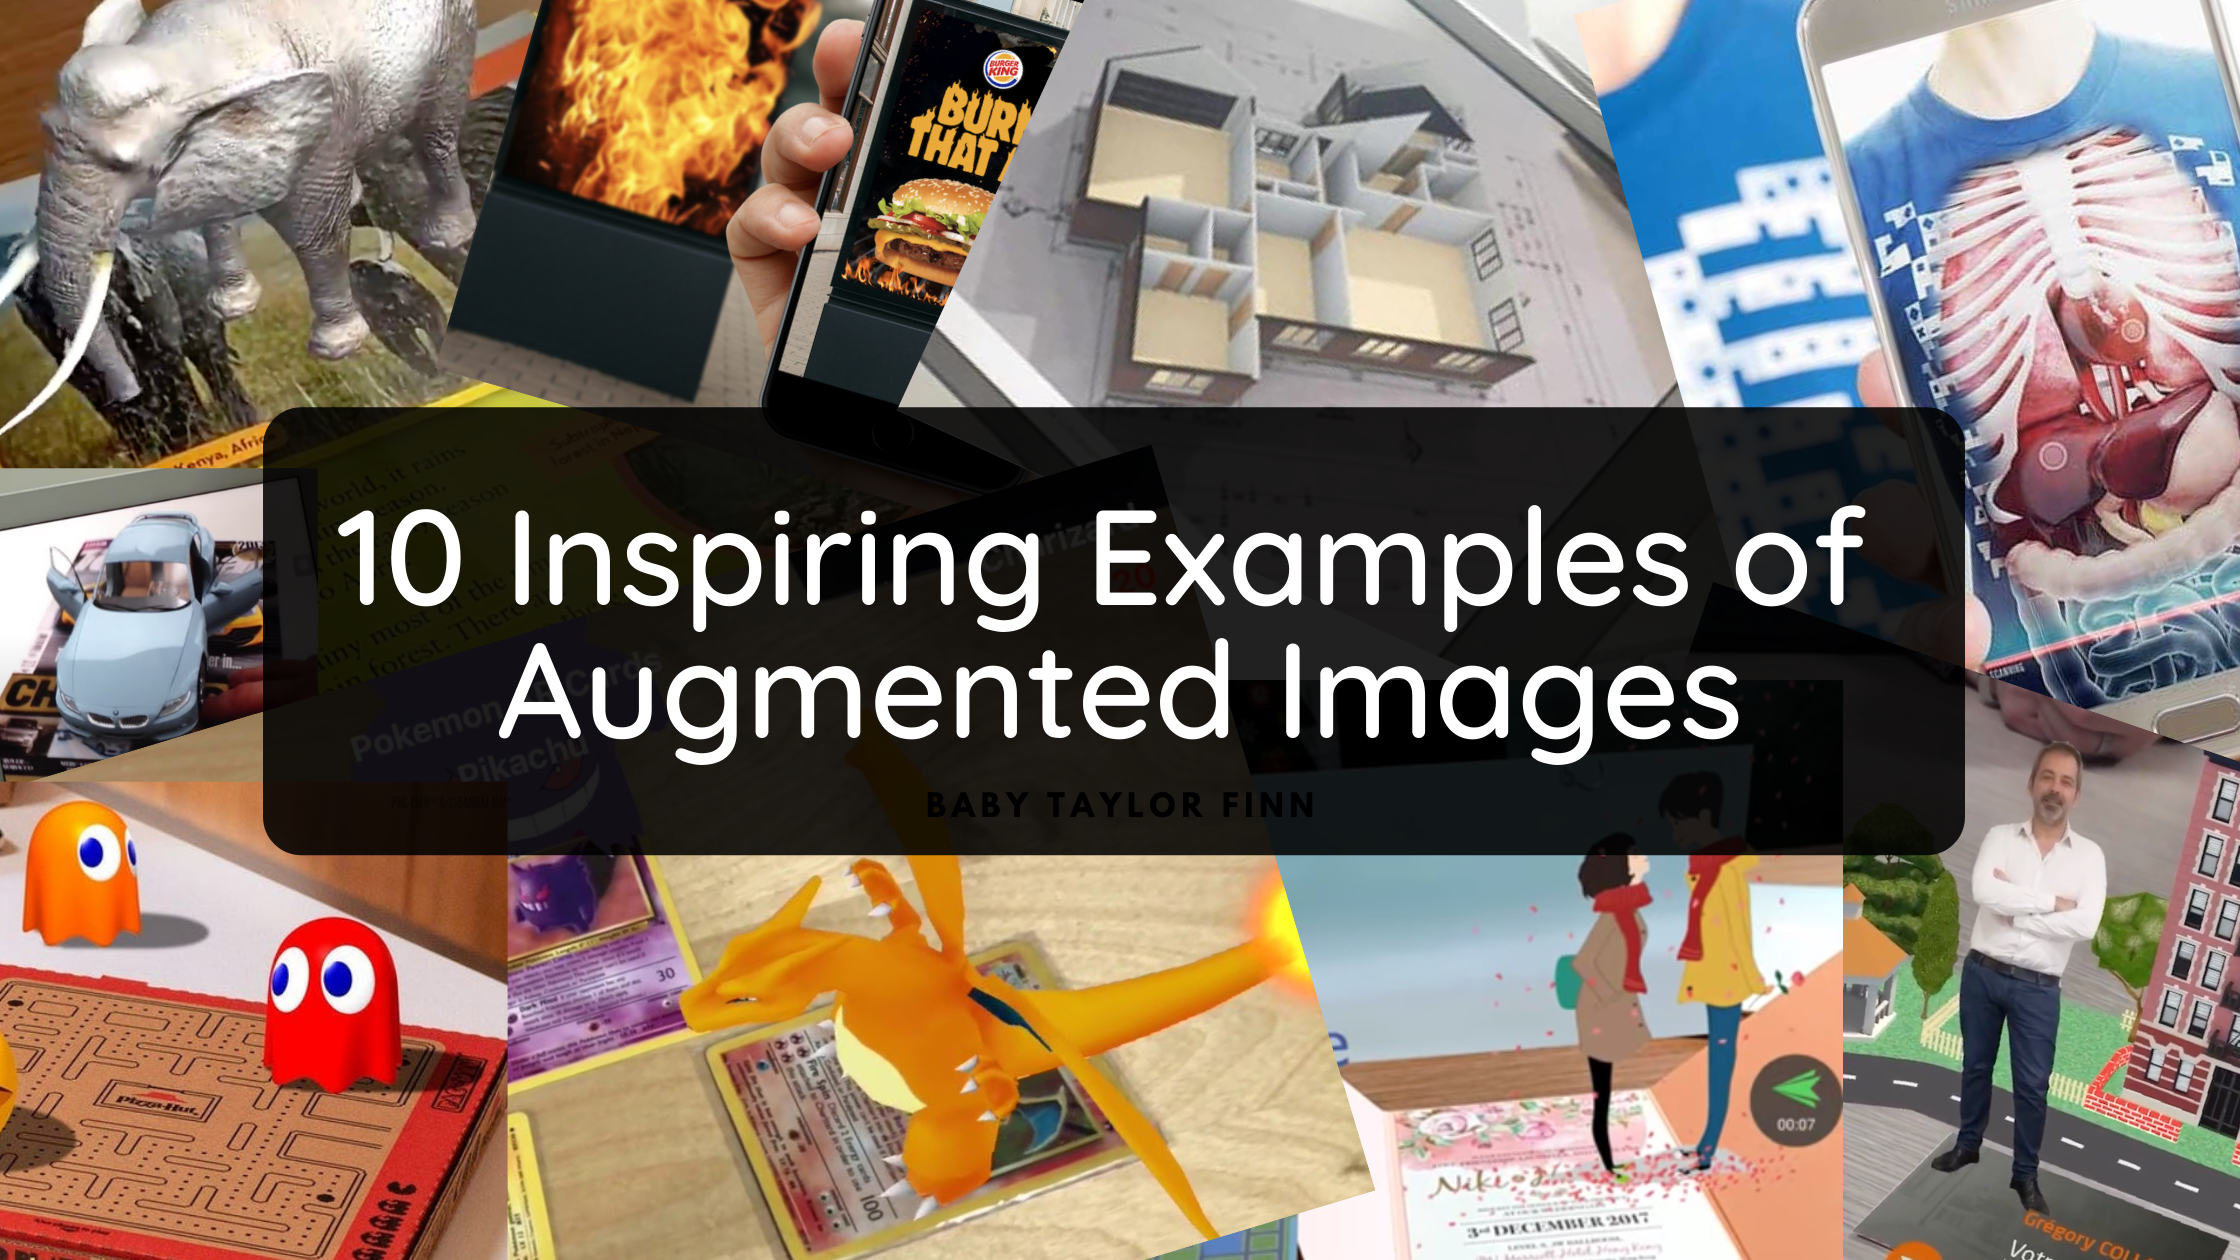 10 inspiring examples of Augmented Images